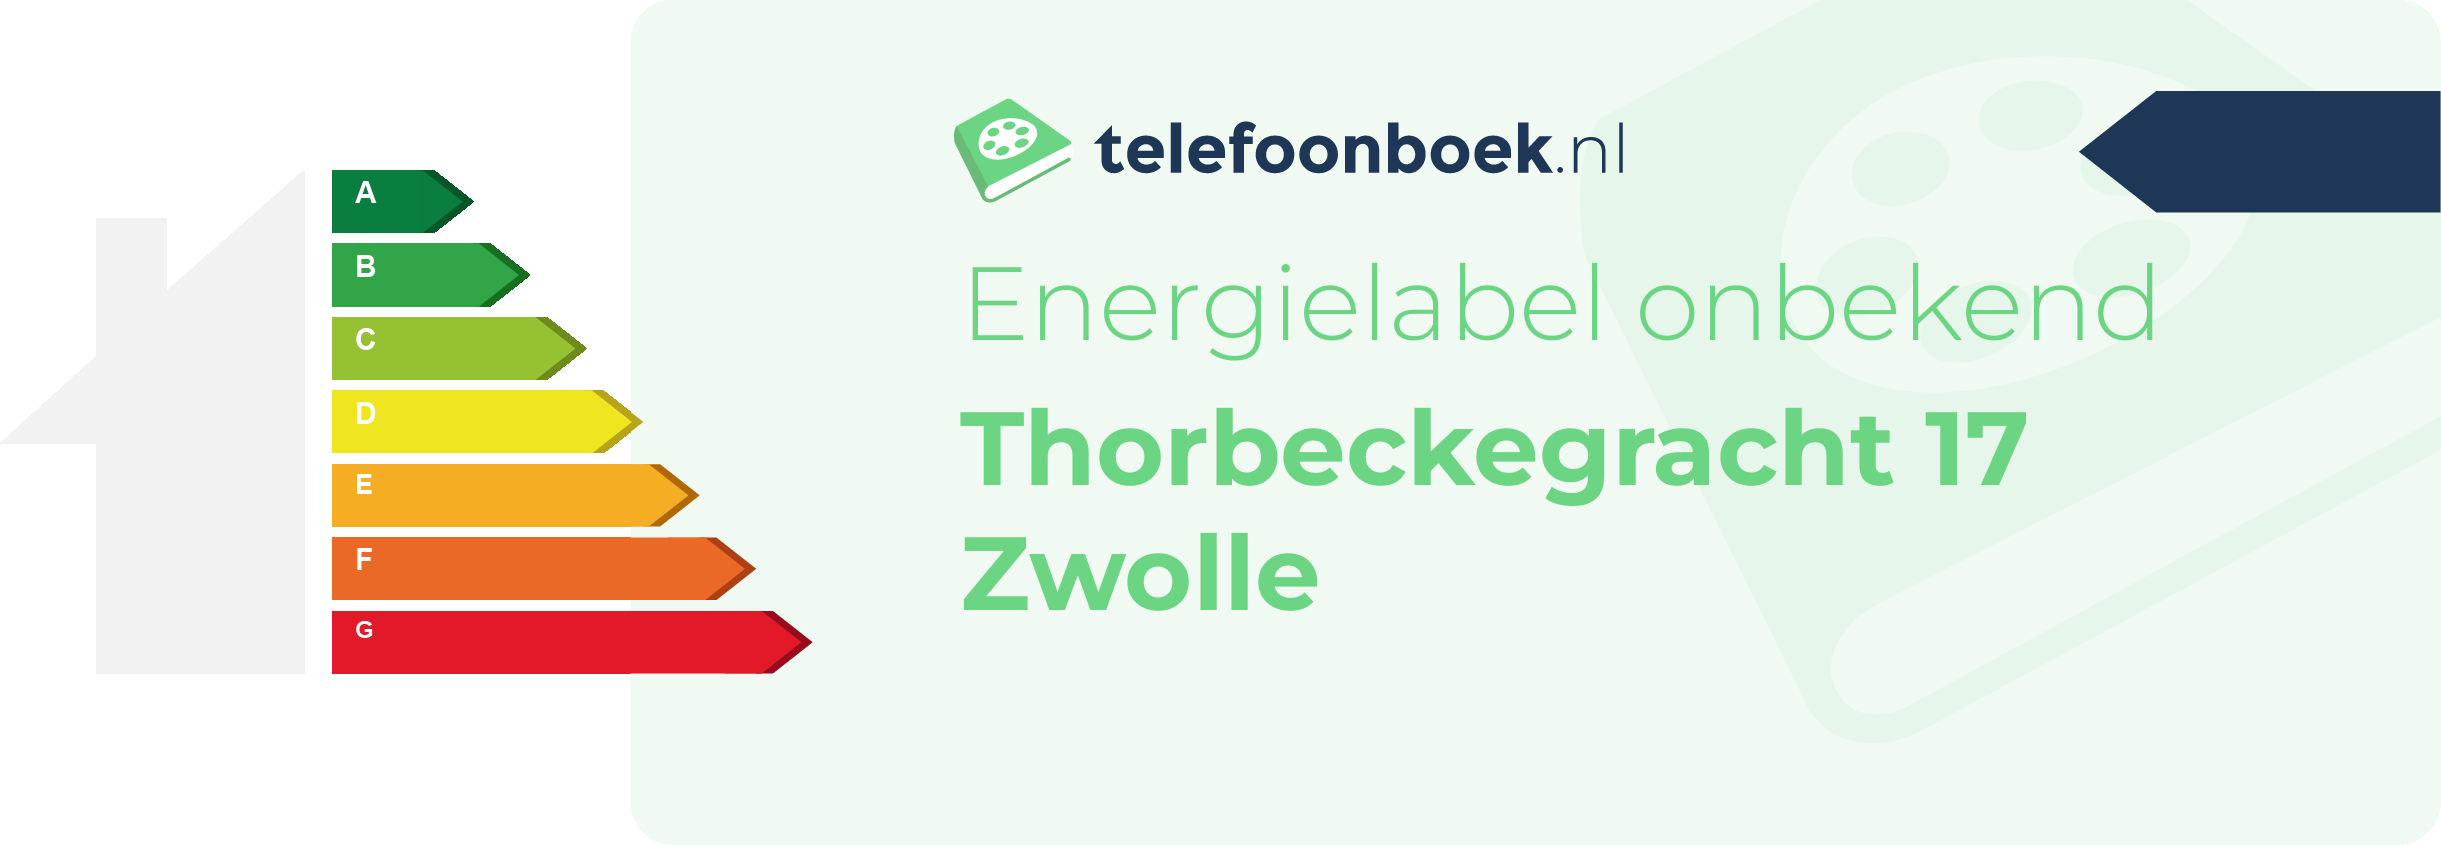 Energielabel Thorbeckegracht 17 Zwolle